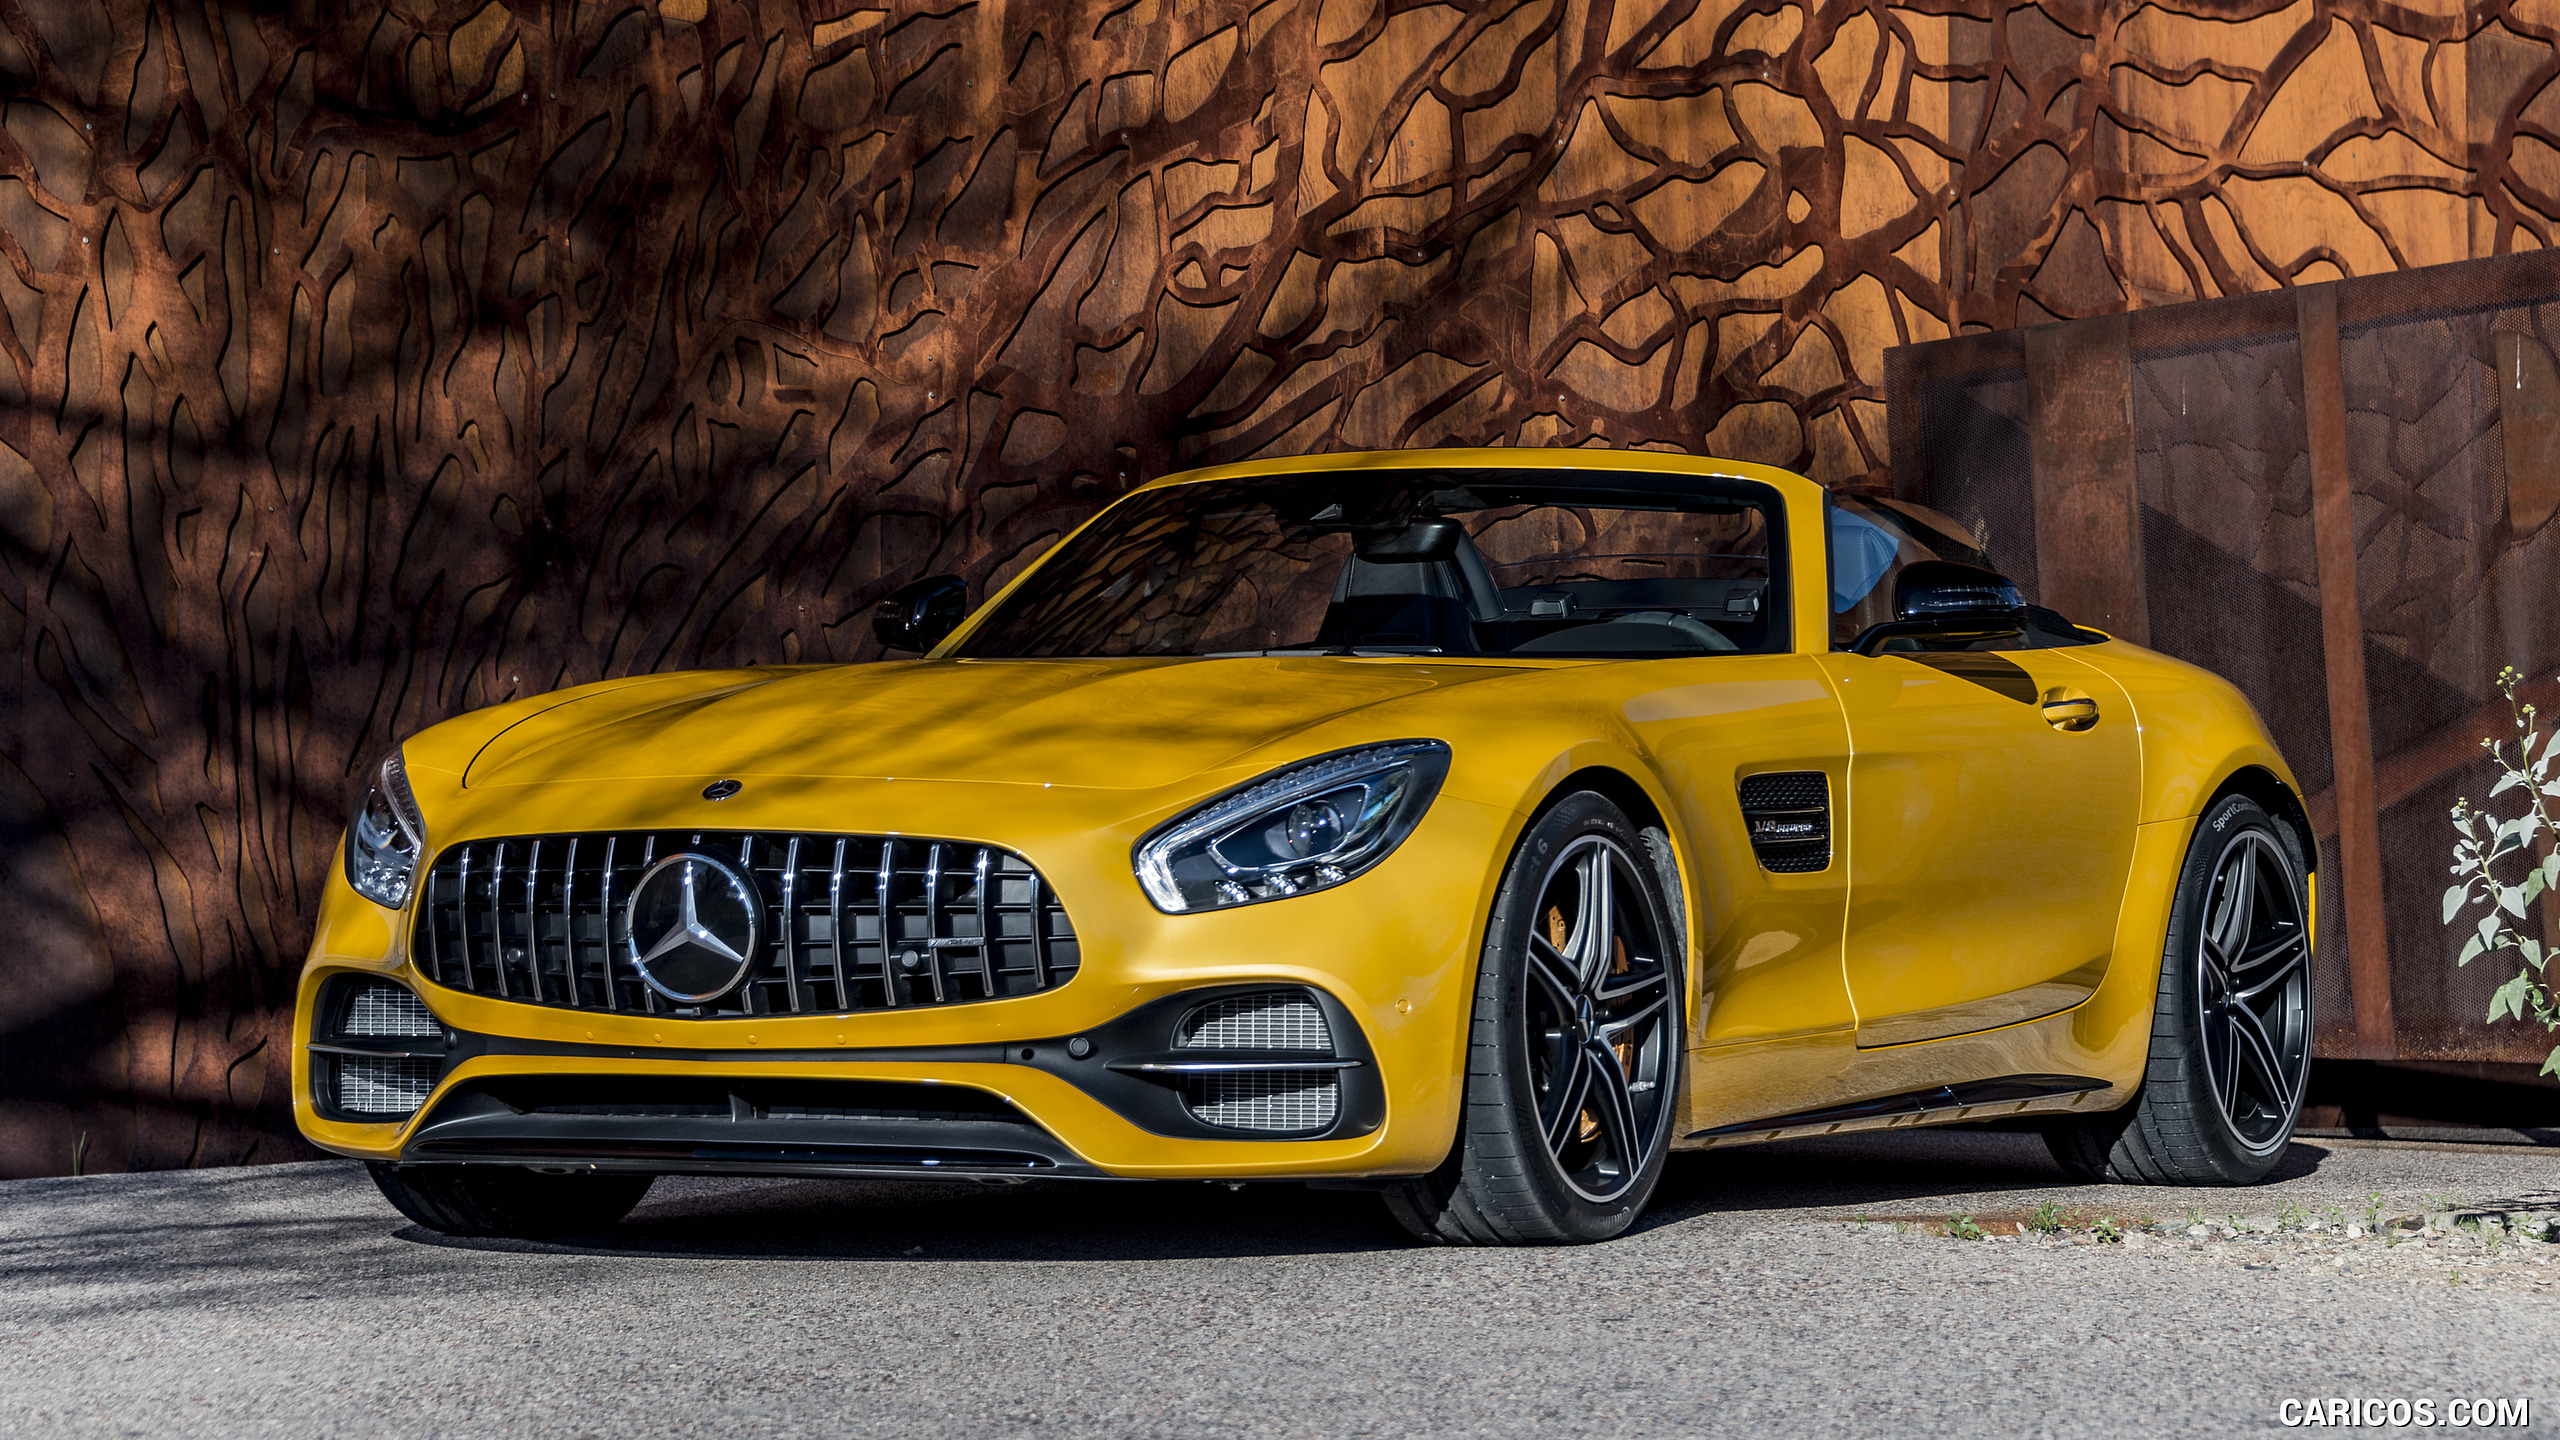 2018 Mercedes-AMG GT C Roadster - Front Three-Quarter, #241 of 350